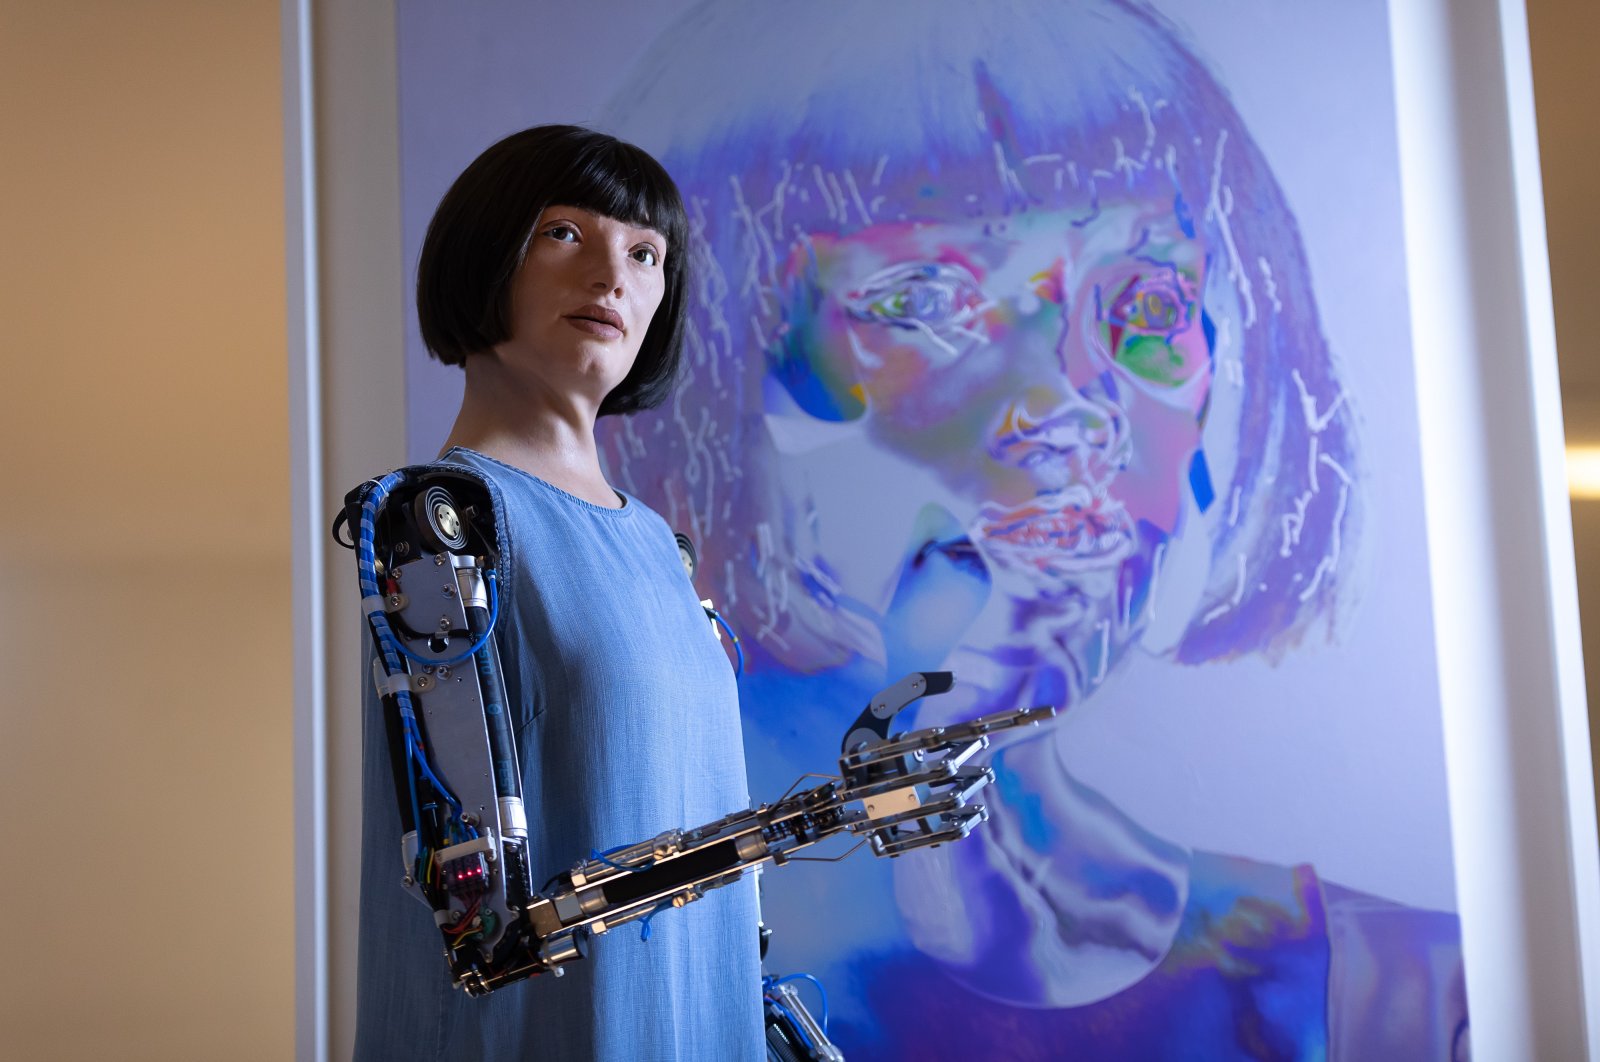 Ai-Da stands in front of one of "her" artworks during "Ai-Da: The World's First Robot Artist" press view at Design Museum in London, U.K., May 18, 2021. 
(Getty Images)